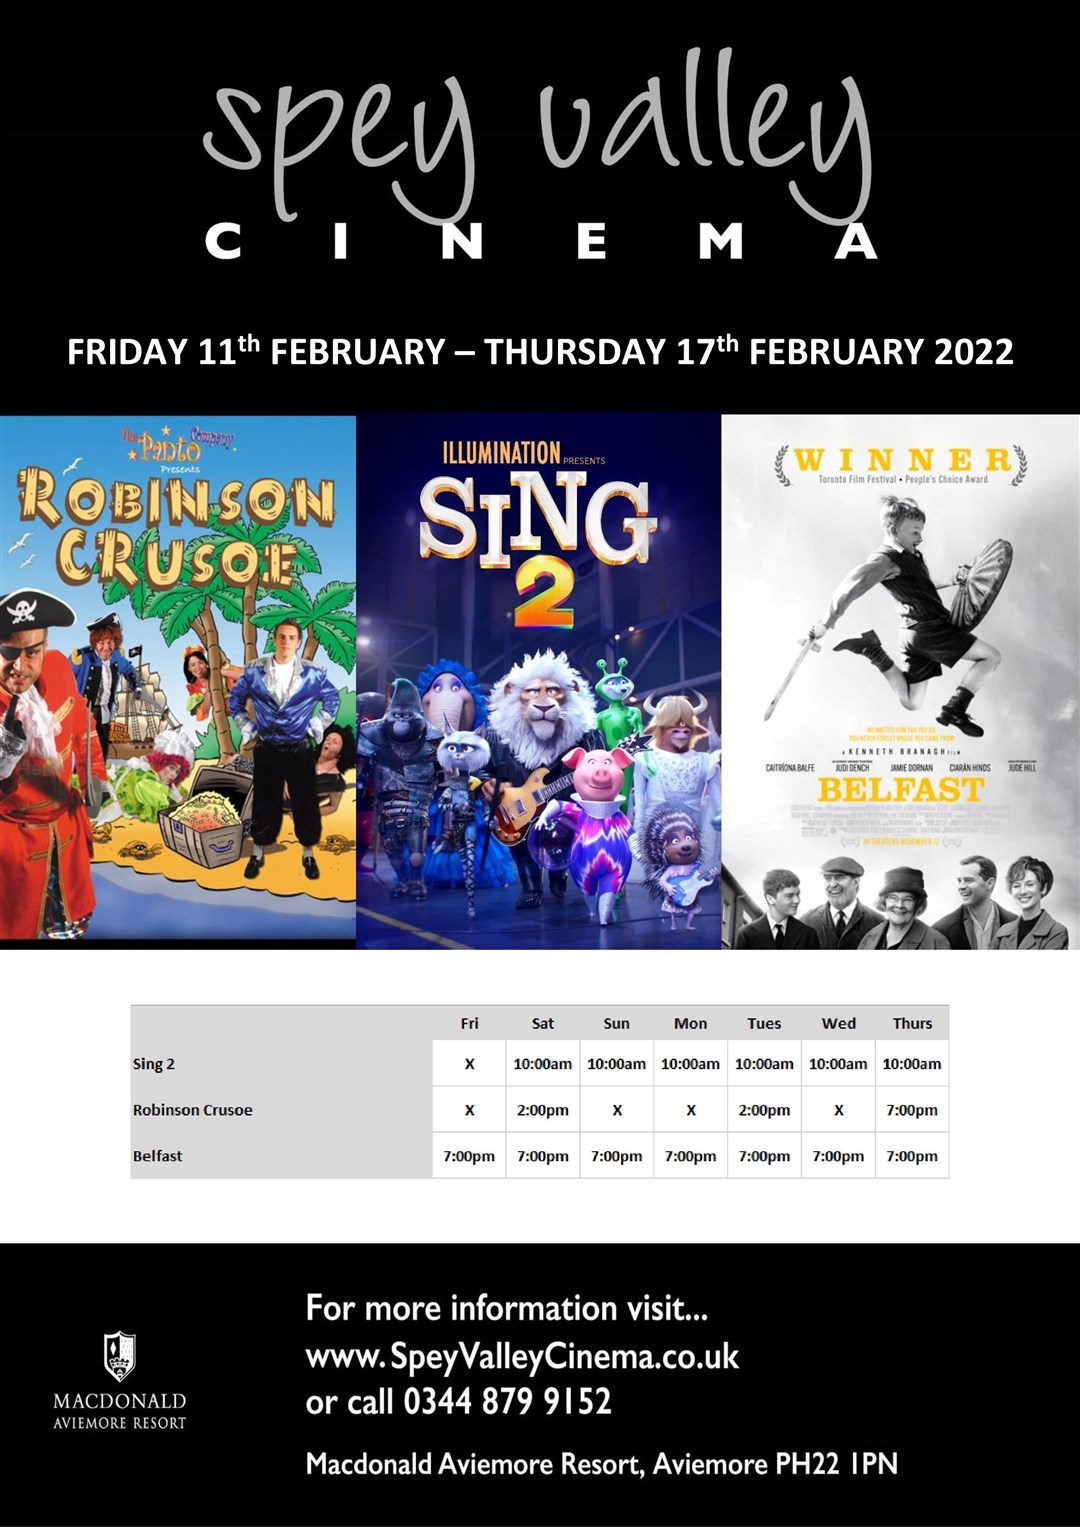 The new programme for the Spey Valley Cinema in Aviemore